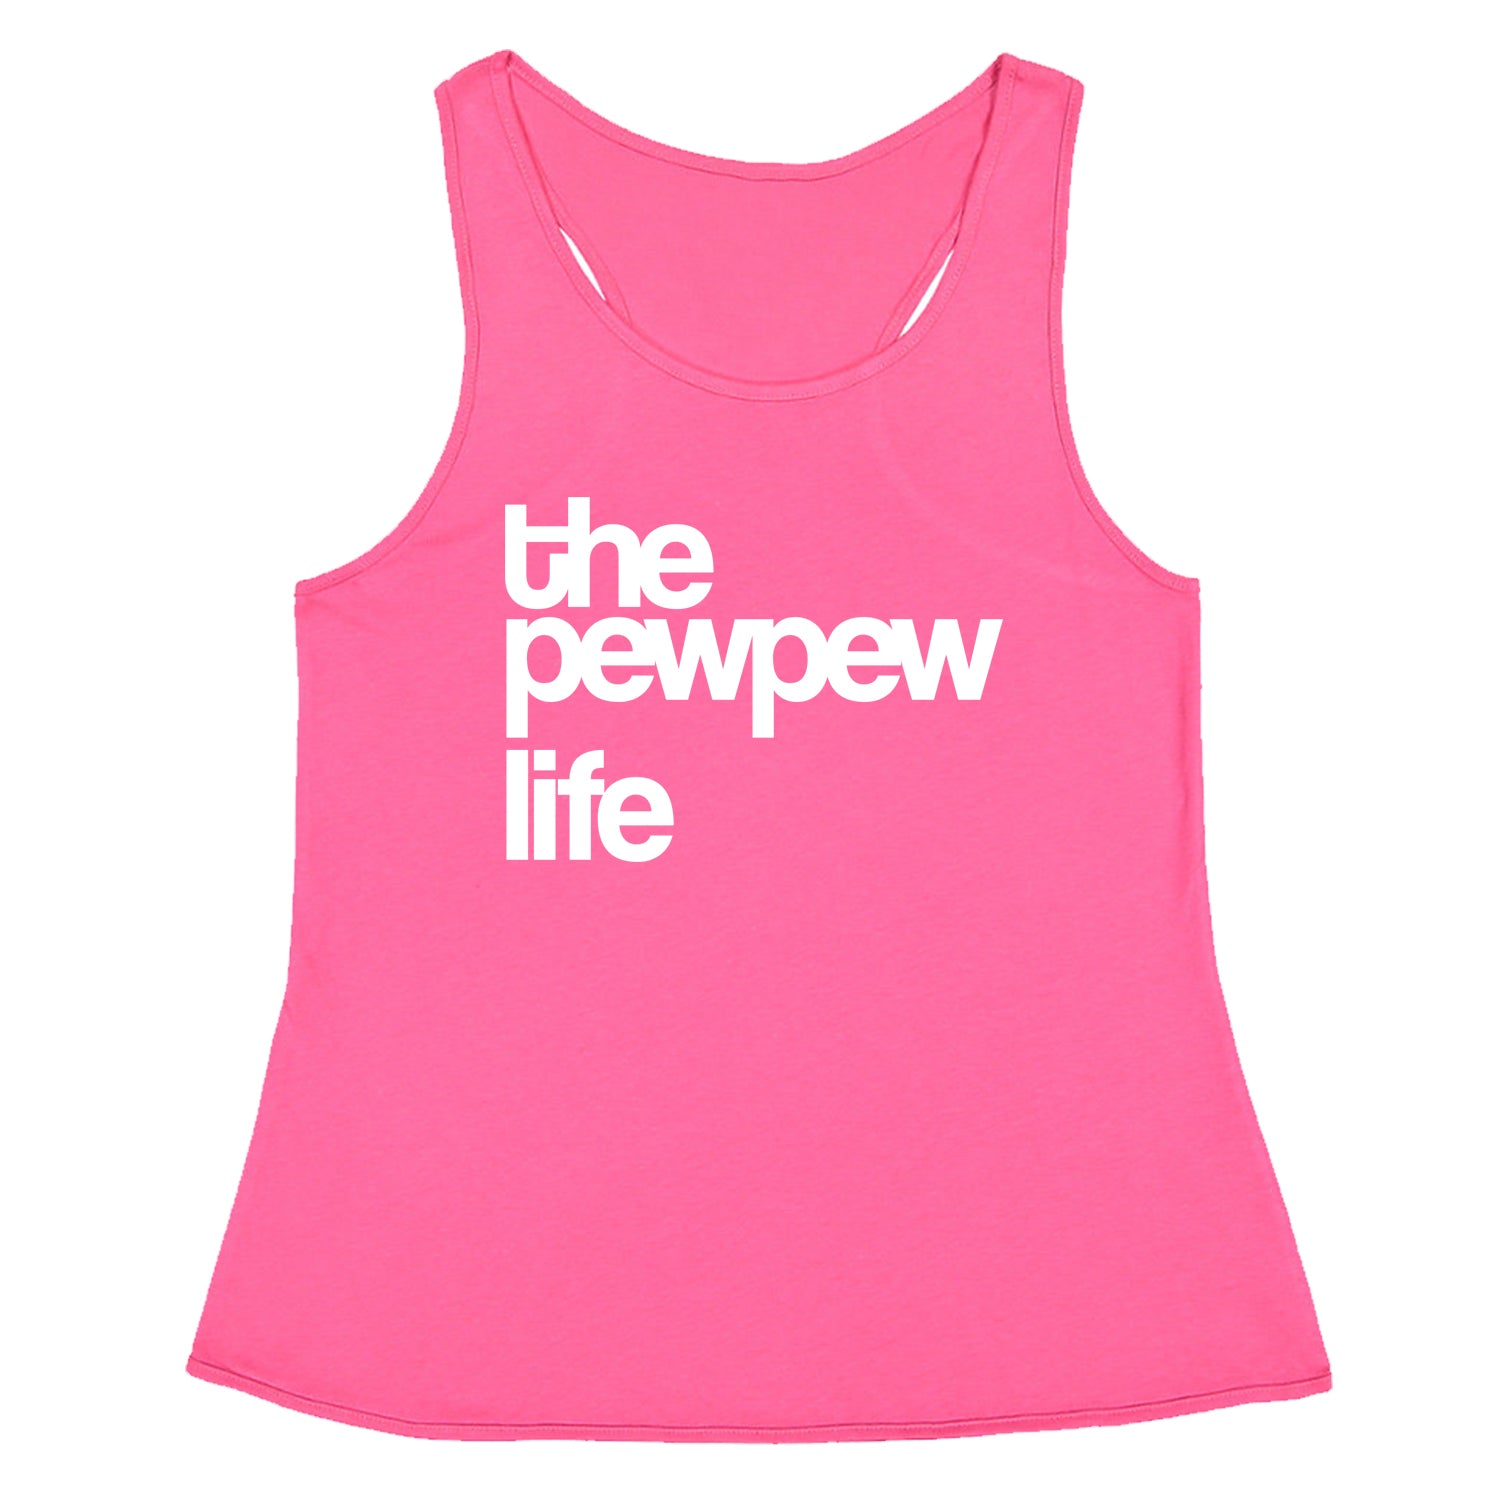 The PewPew Pew Pew Life Gun Rights Racerback Tank Top for Women #expressiontees by Expression Tees